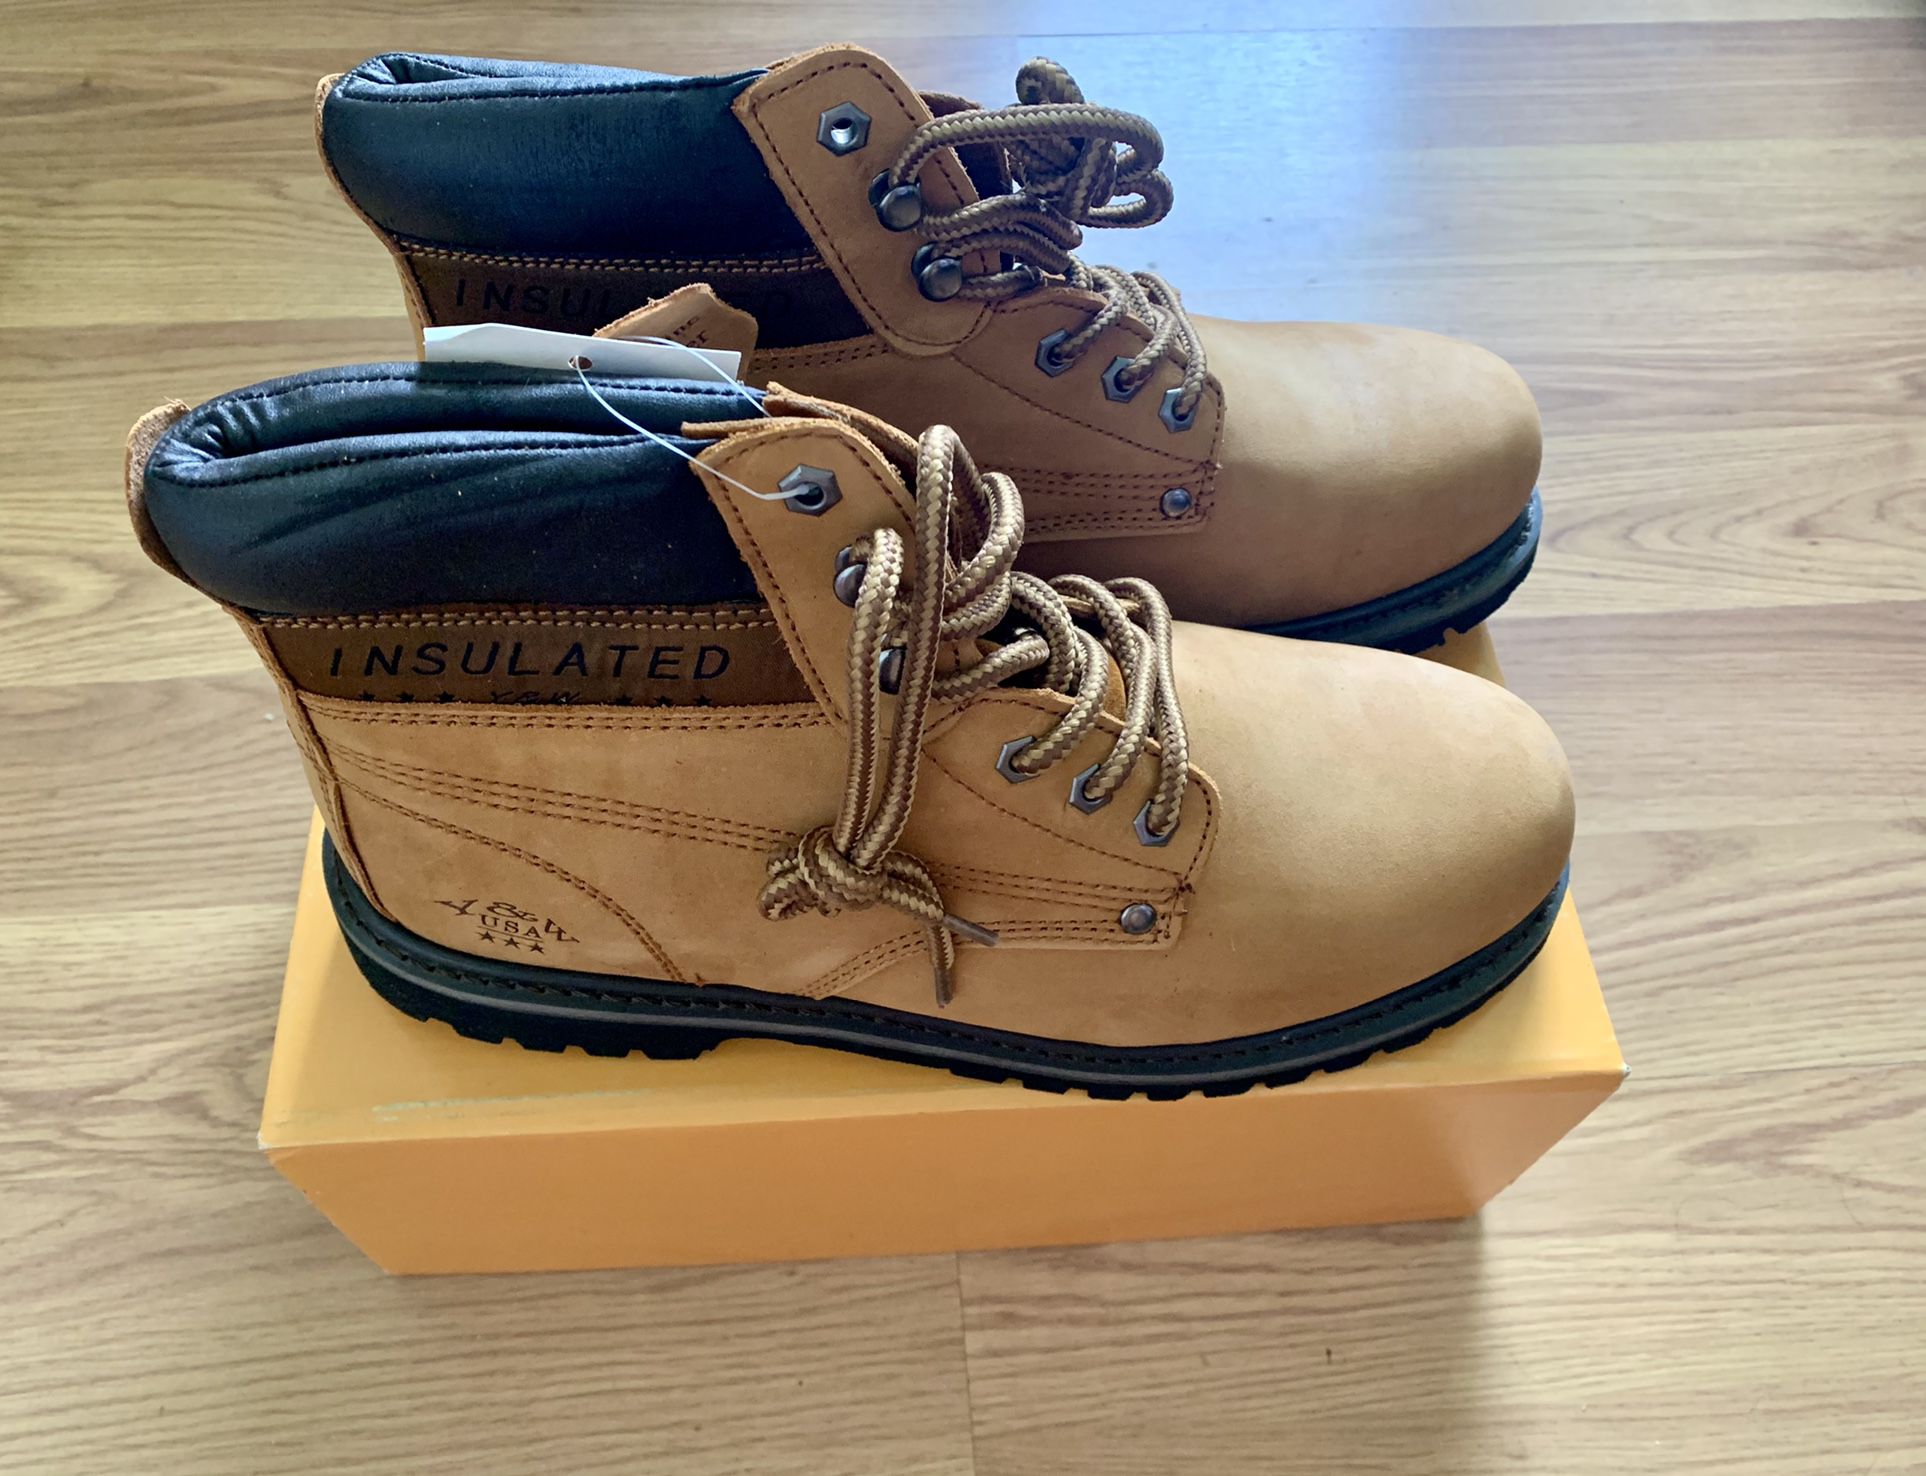 New with tags men’s work boot size 10 1/2